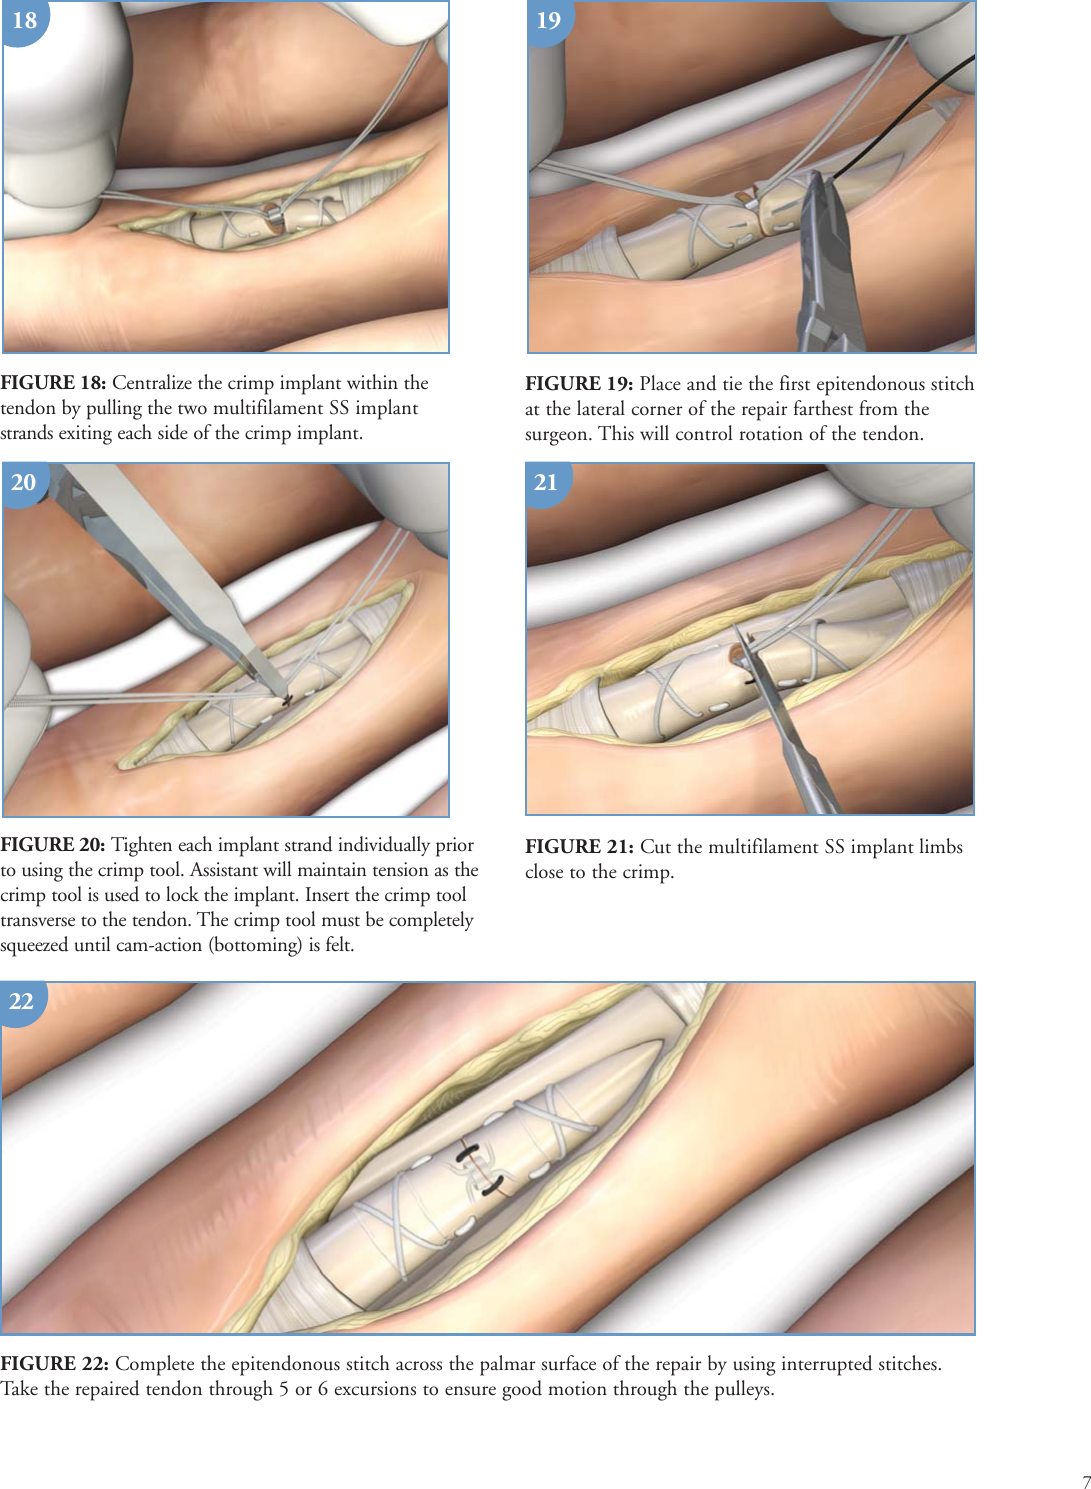 Page 7 of 9 - Print  PONTi S Surgical Technique Brochure 08Oct15